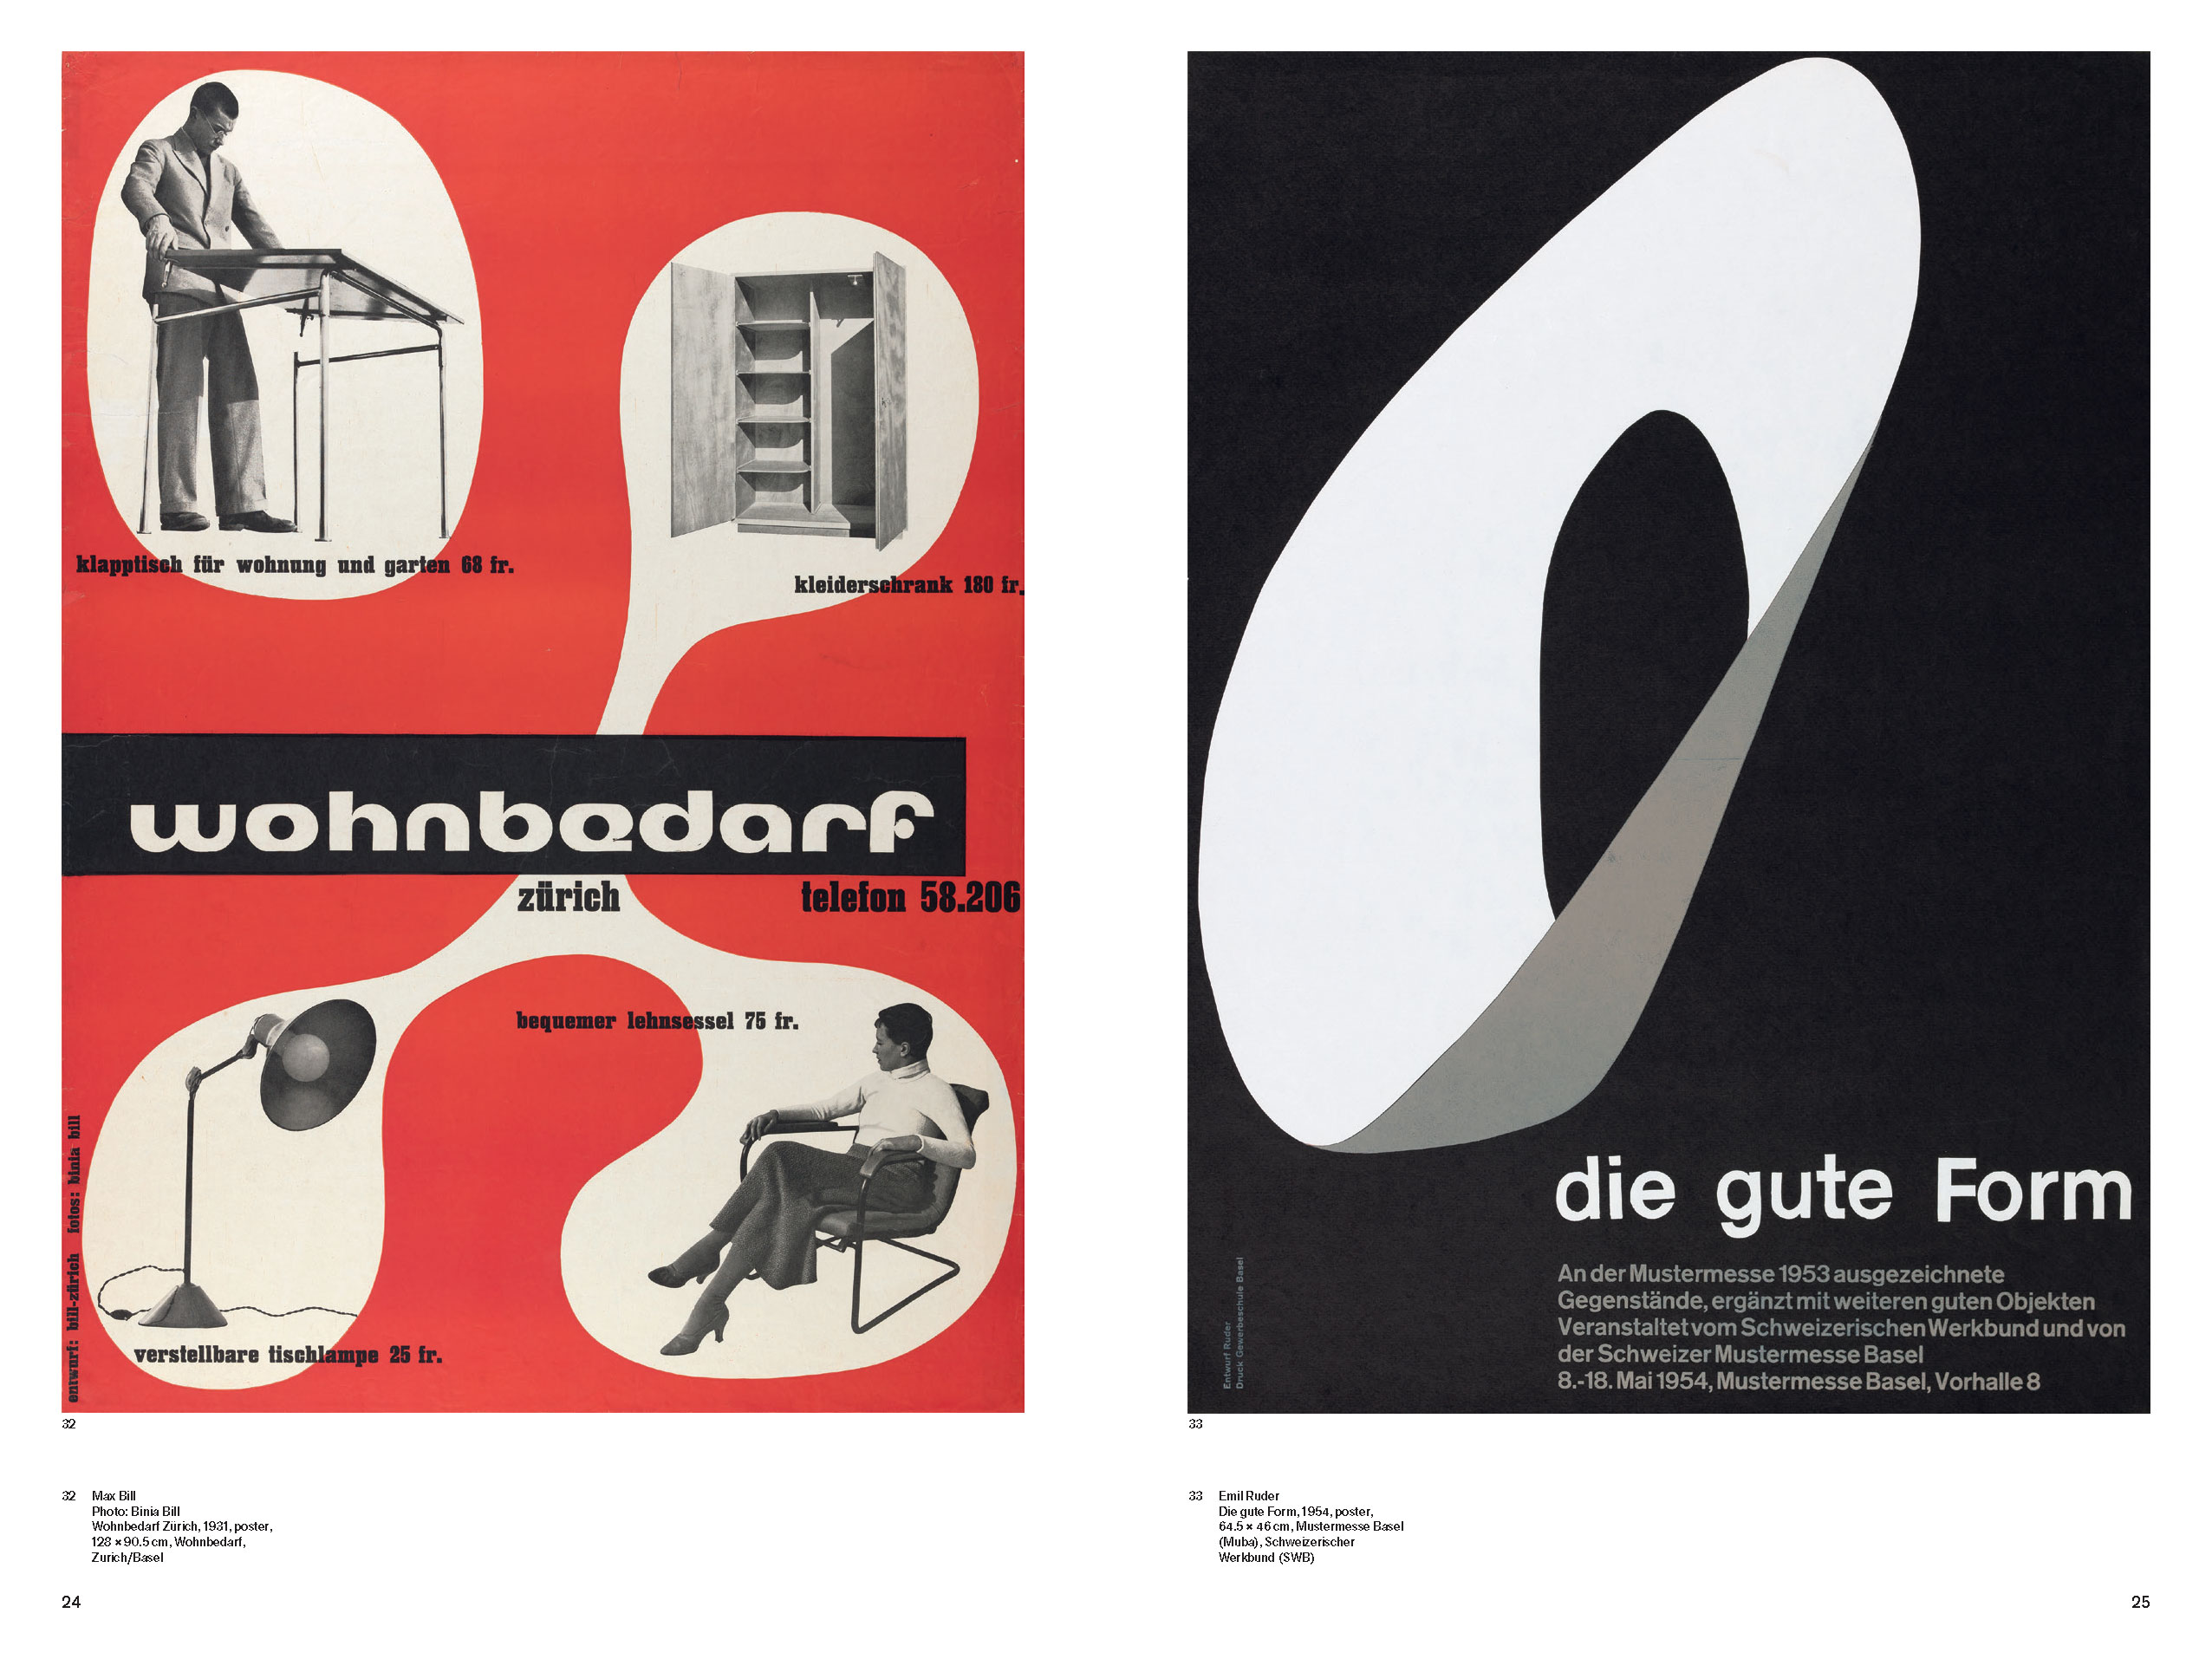 A spread from the English version of 100 Years of Swiss Graphic Design